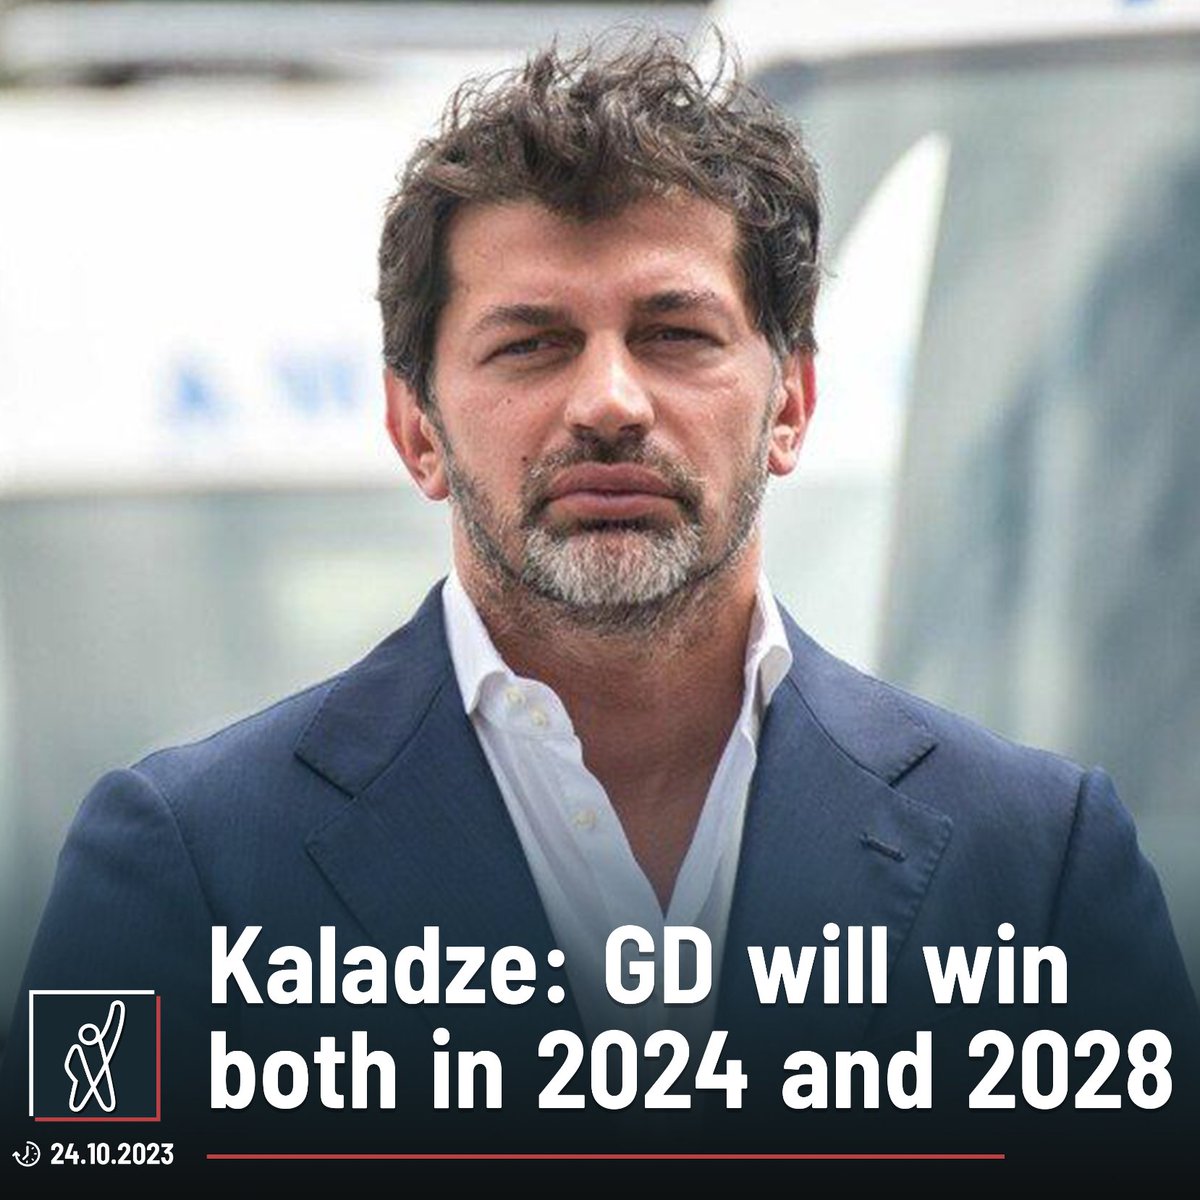 “Everything will be perfect. The Georgian Dream will definitely win in 2024 and will come to power with a constitutional majority. Remember today and my words. Georgian Dream has not had such support since 2012. We will win in 2024 and in 2028 as well,” Kakha Kaladze, Tbilisi…